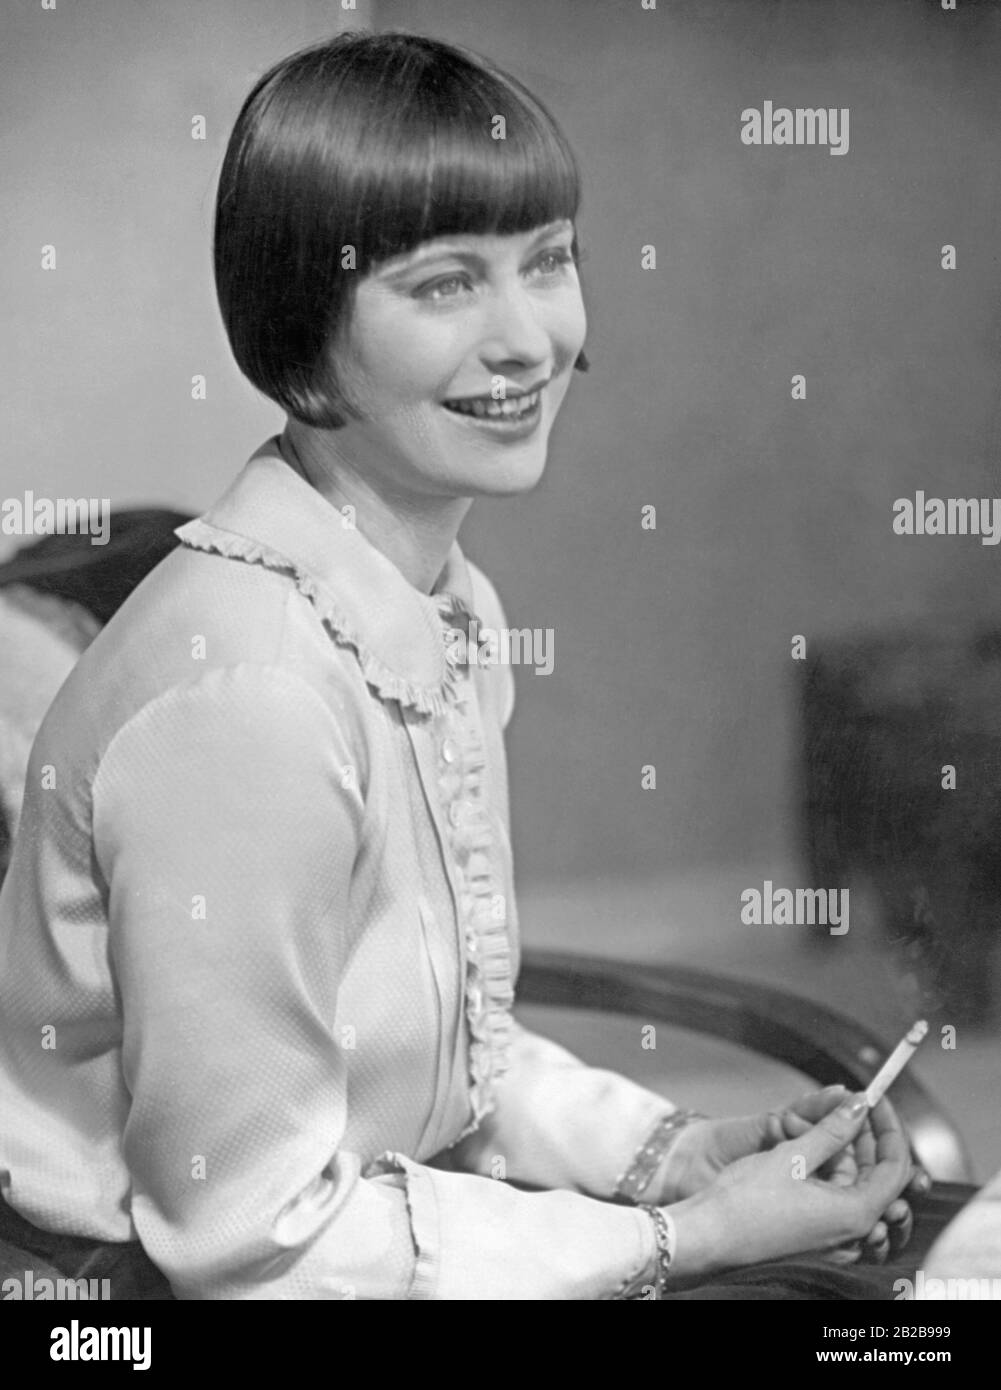 An emancipated woman with bob haircut and cigarette from the 1920s, very different from the type of woman before 1914. Stock Photo